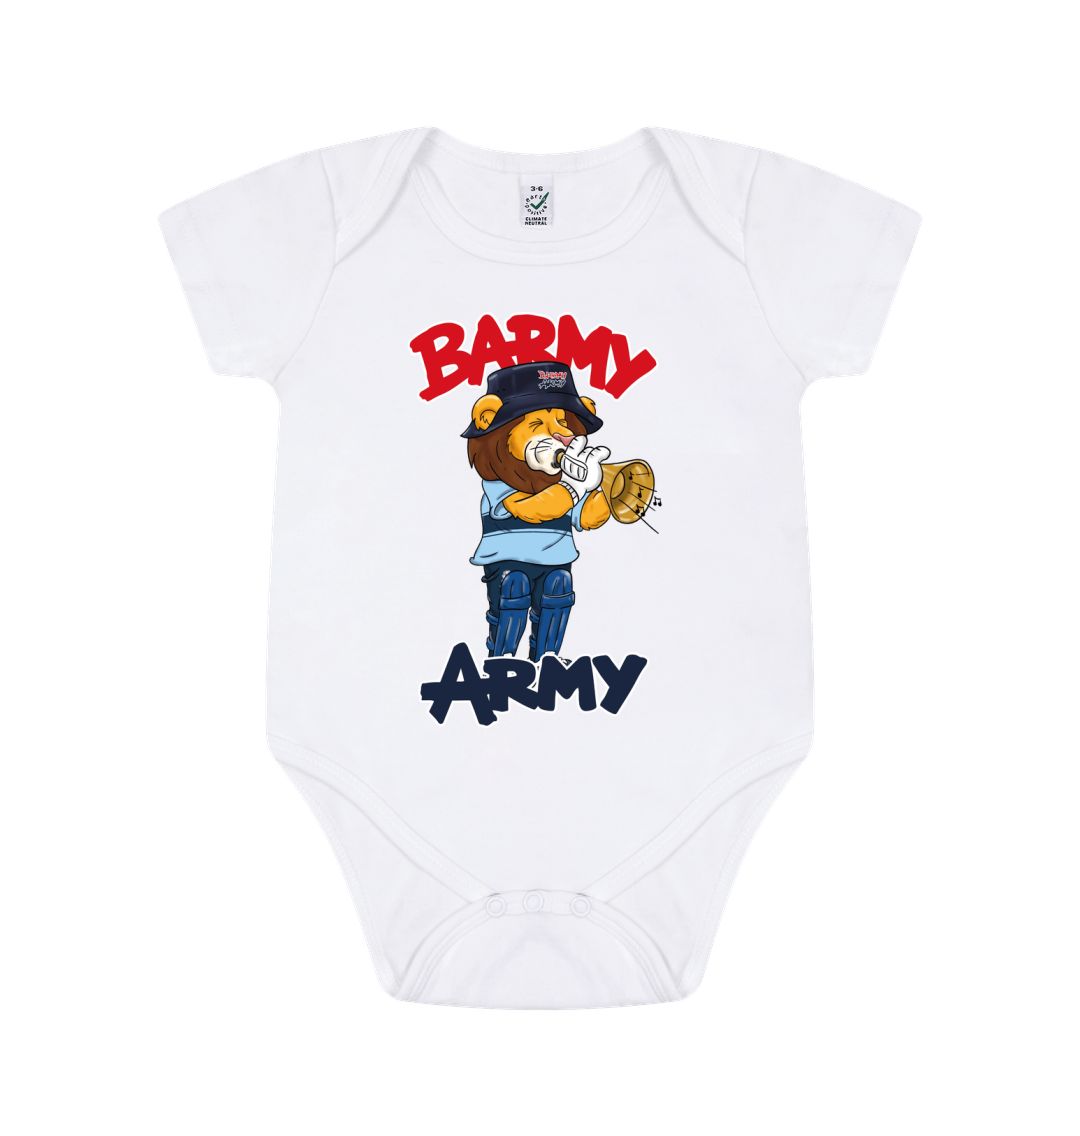 White Barmy Army Trumpet Mascot Baby Grow